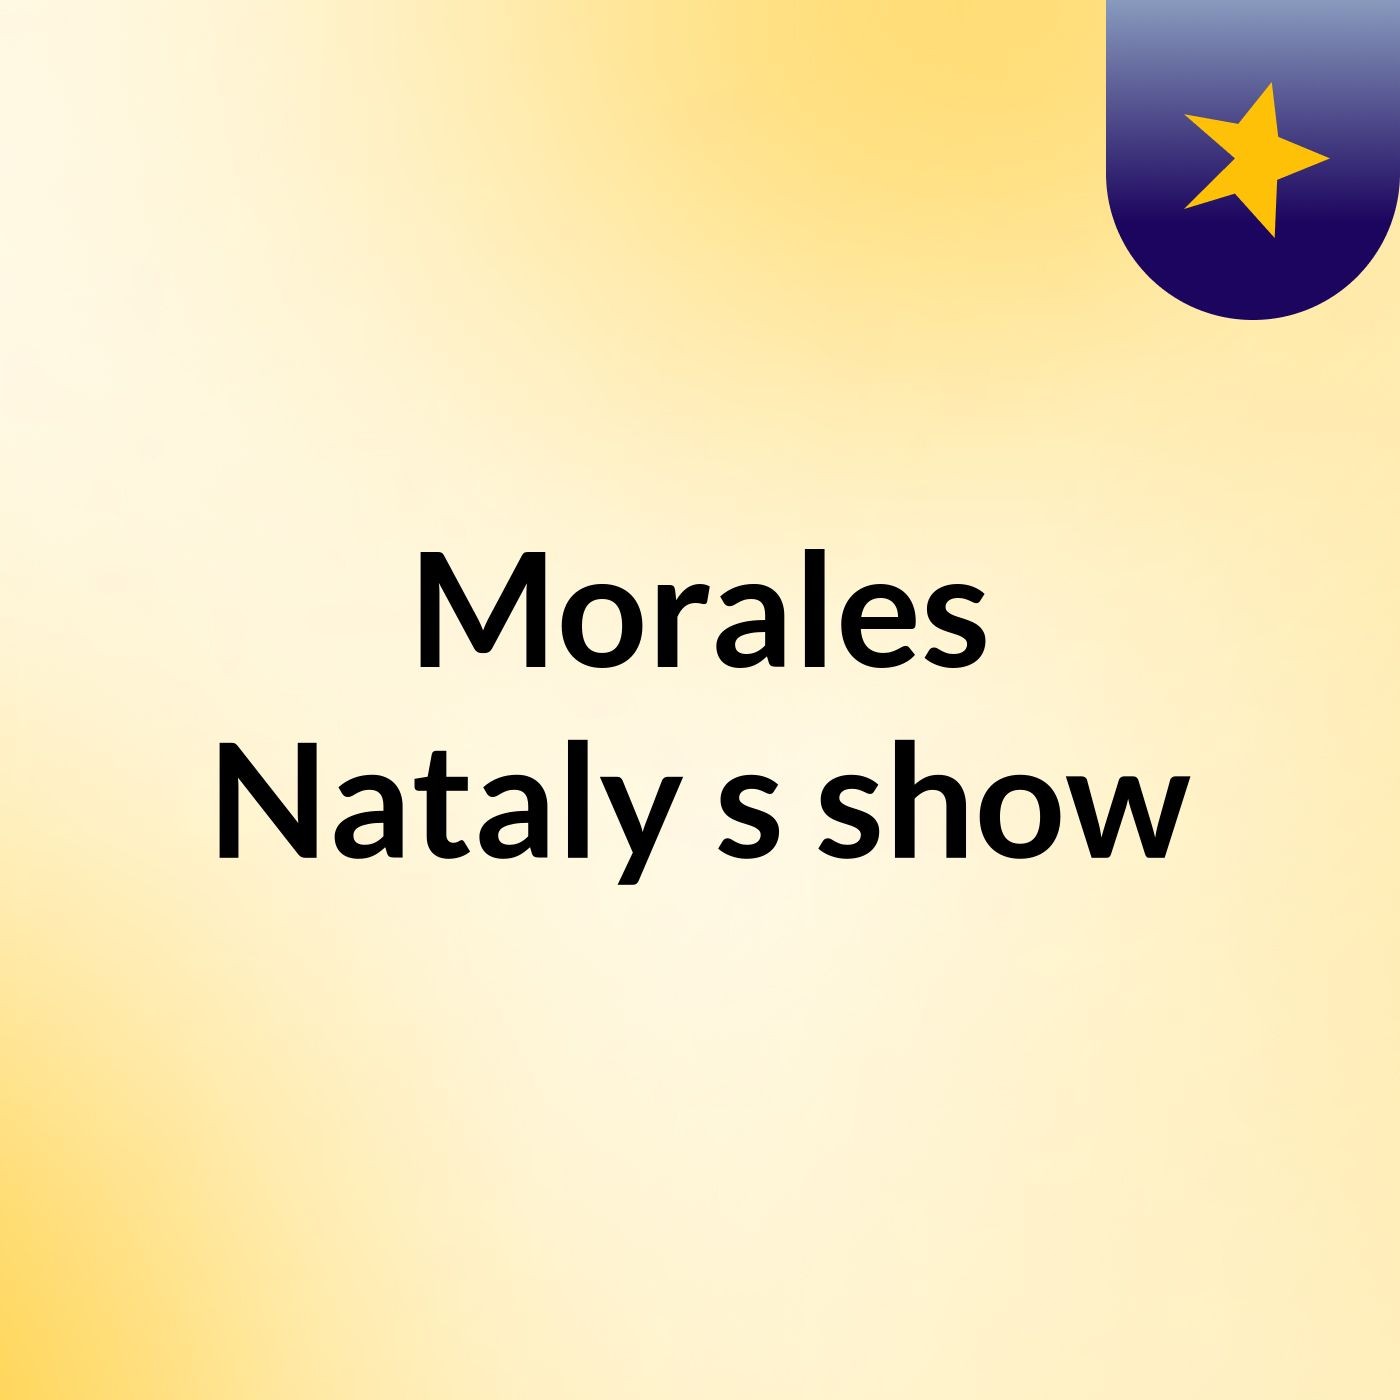 Morales Nataly's show